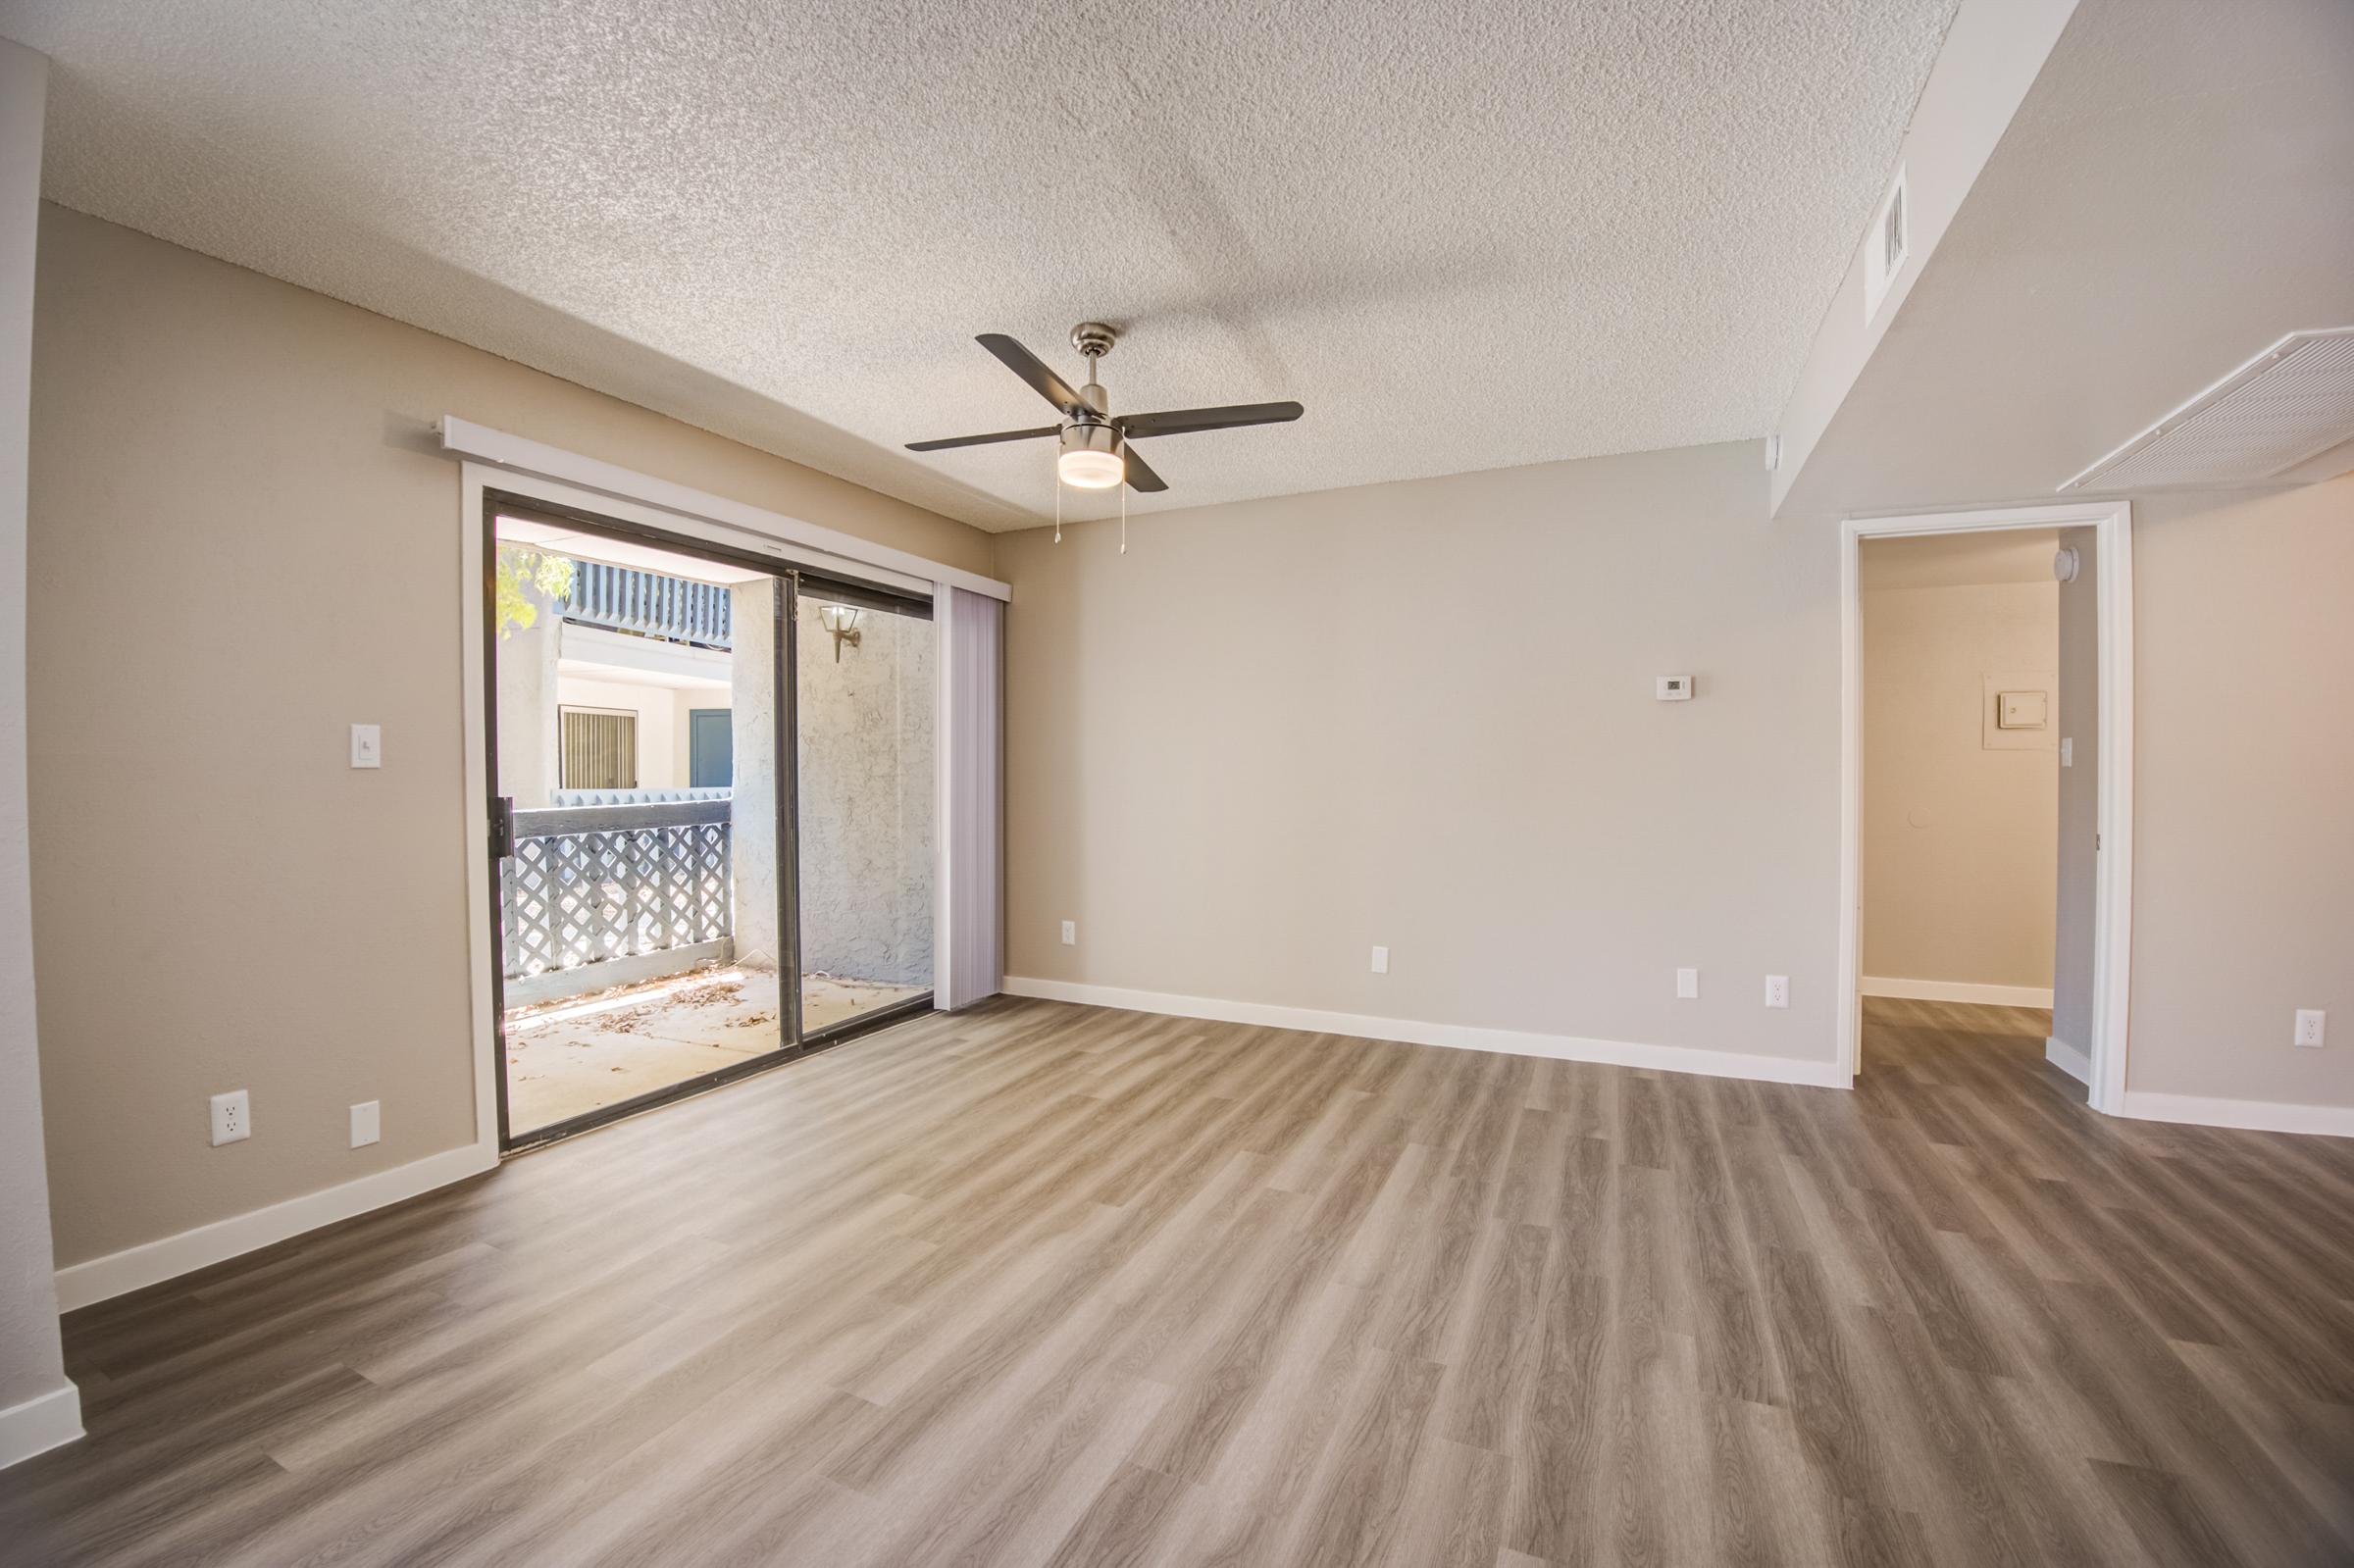 The apartment living room with wood-style flooring and a balcony at Rise at the Meadows.